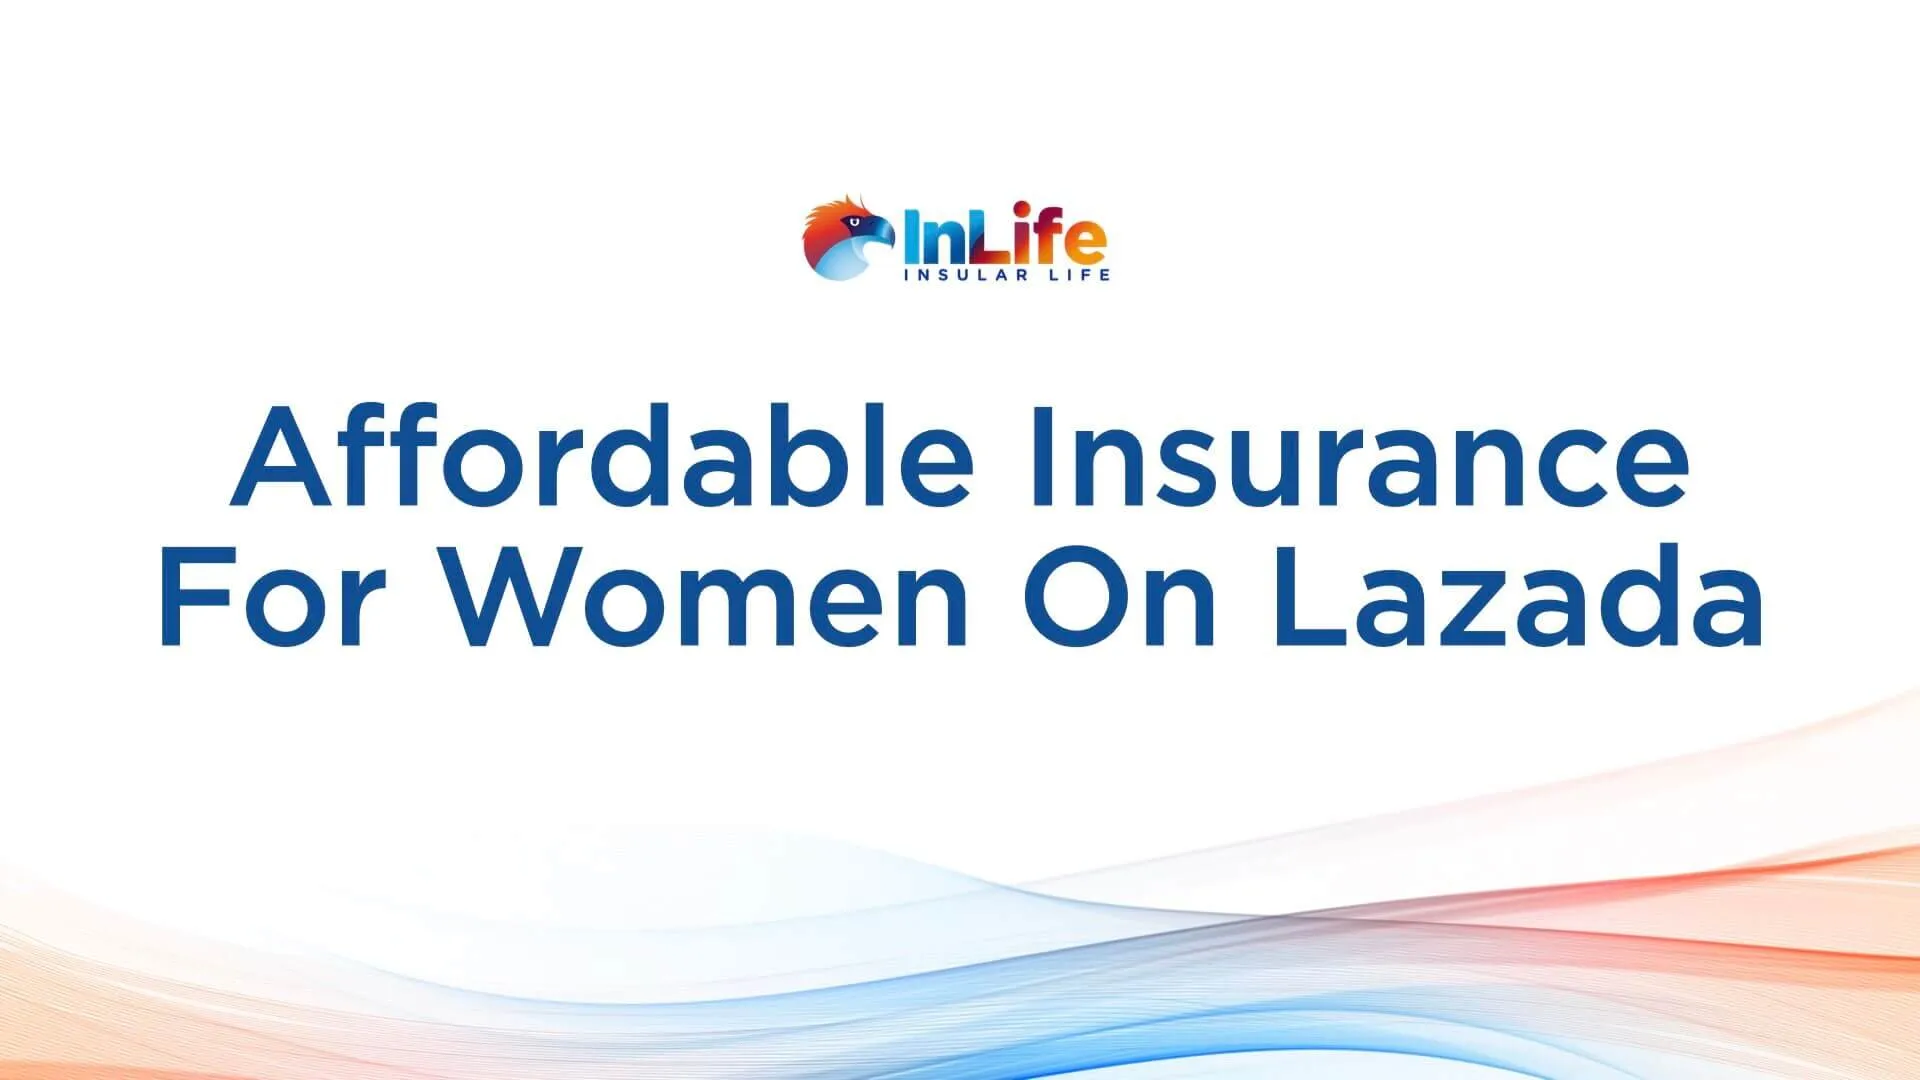 insular-life-offers-affordable-insurance-for-women-on-lazada